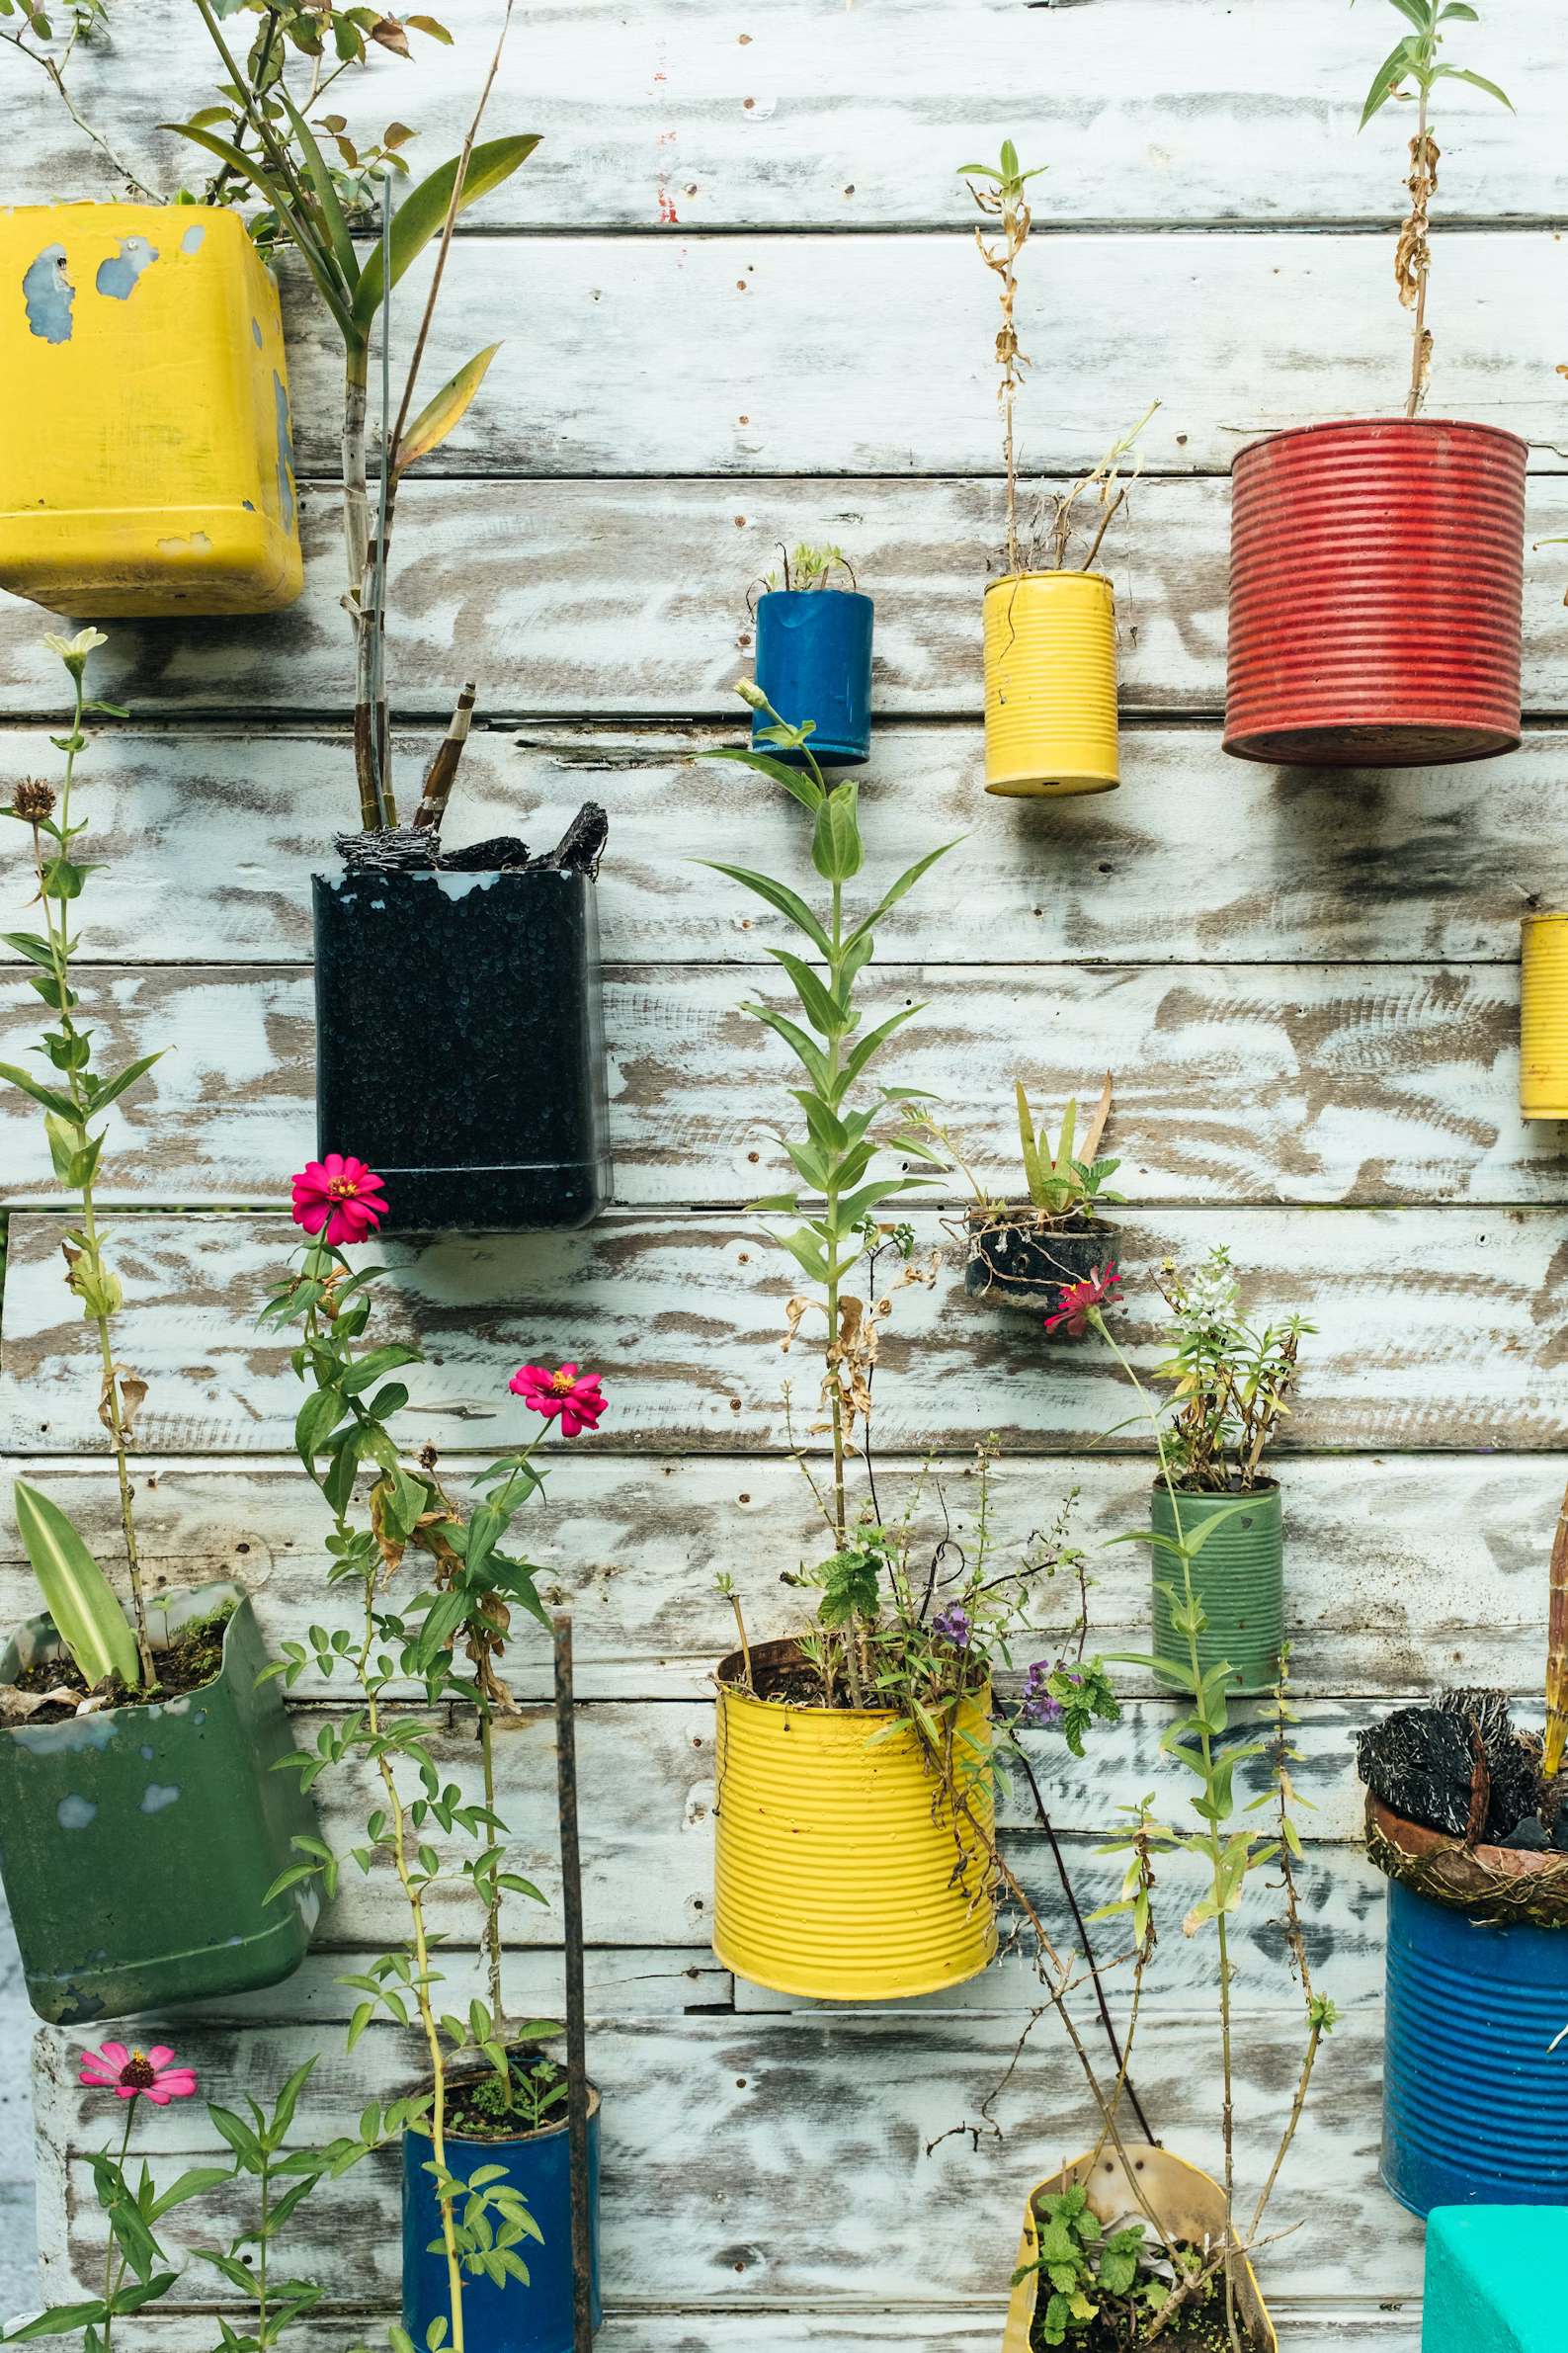 Plastic containers and cans repurposed as flower pots